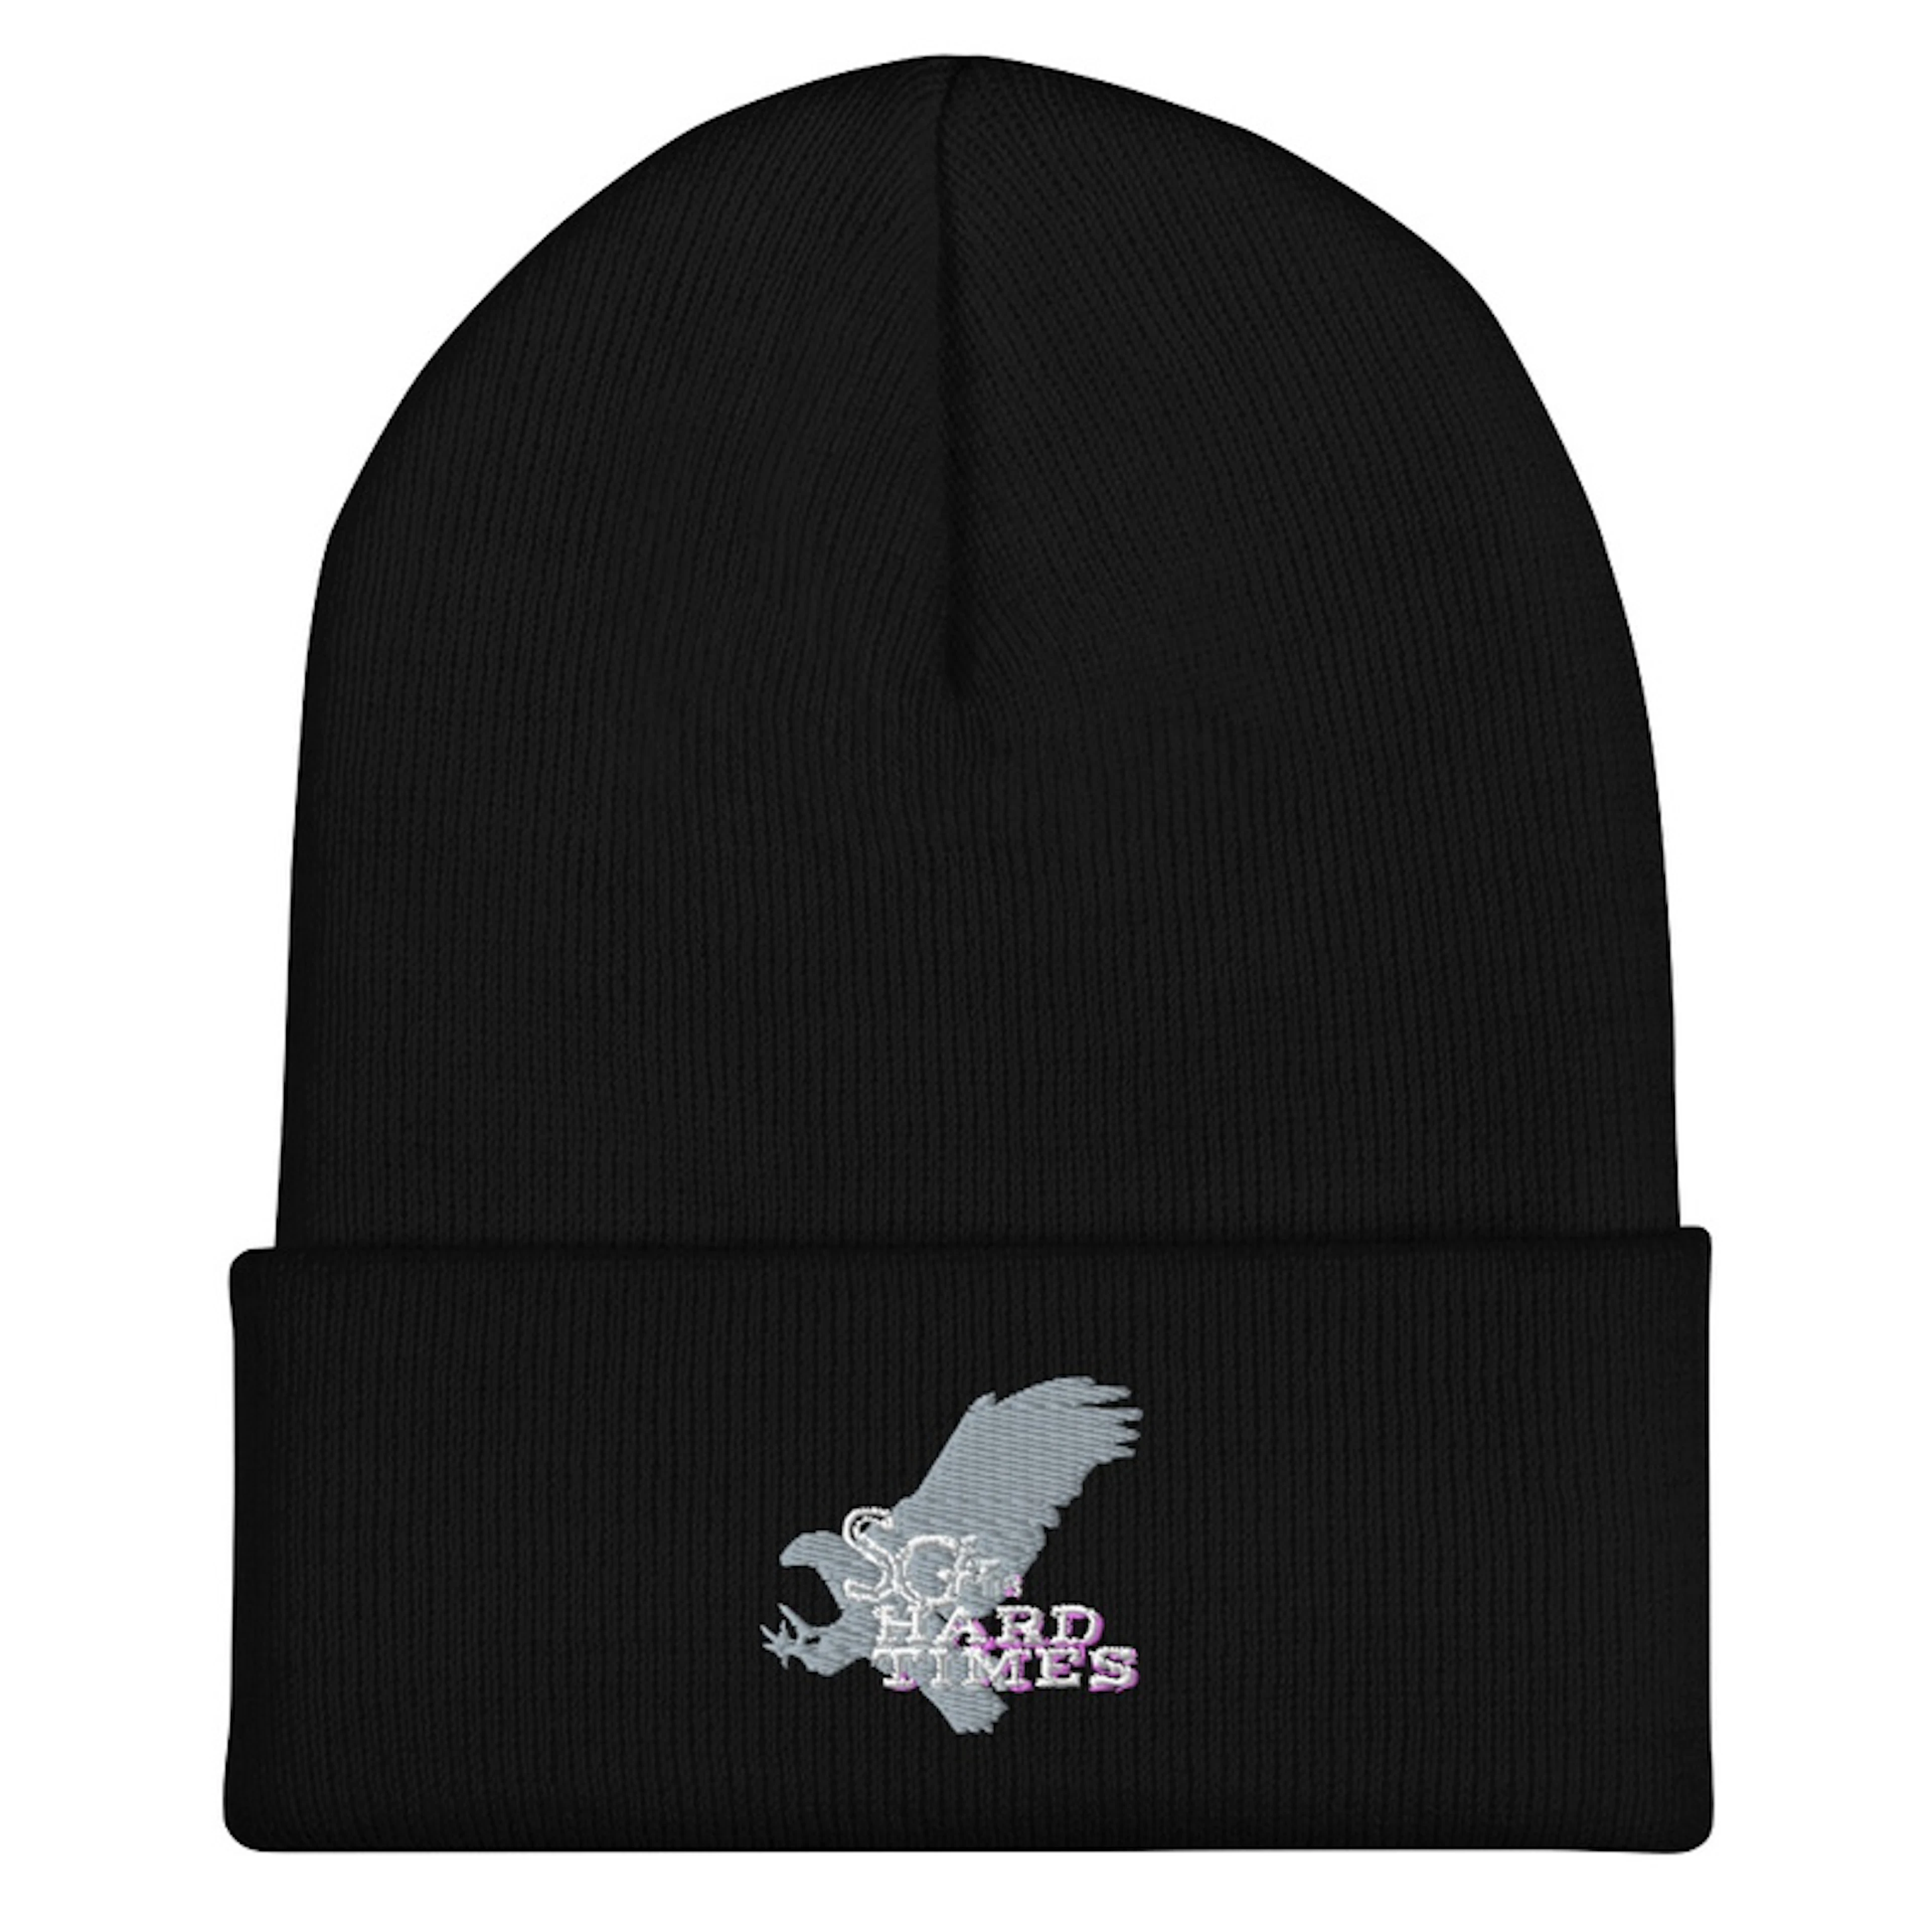 SGHT Beenie